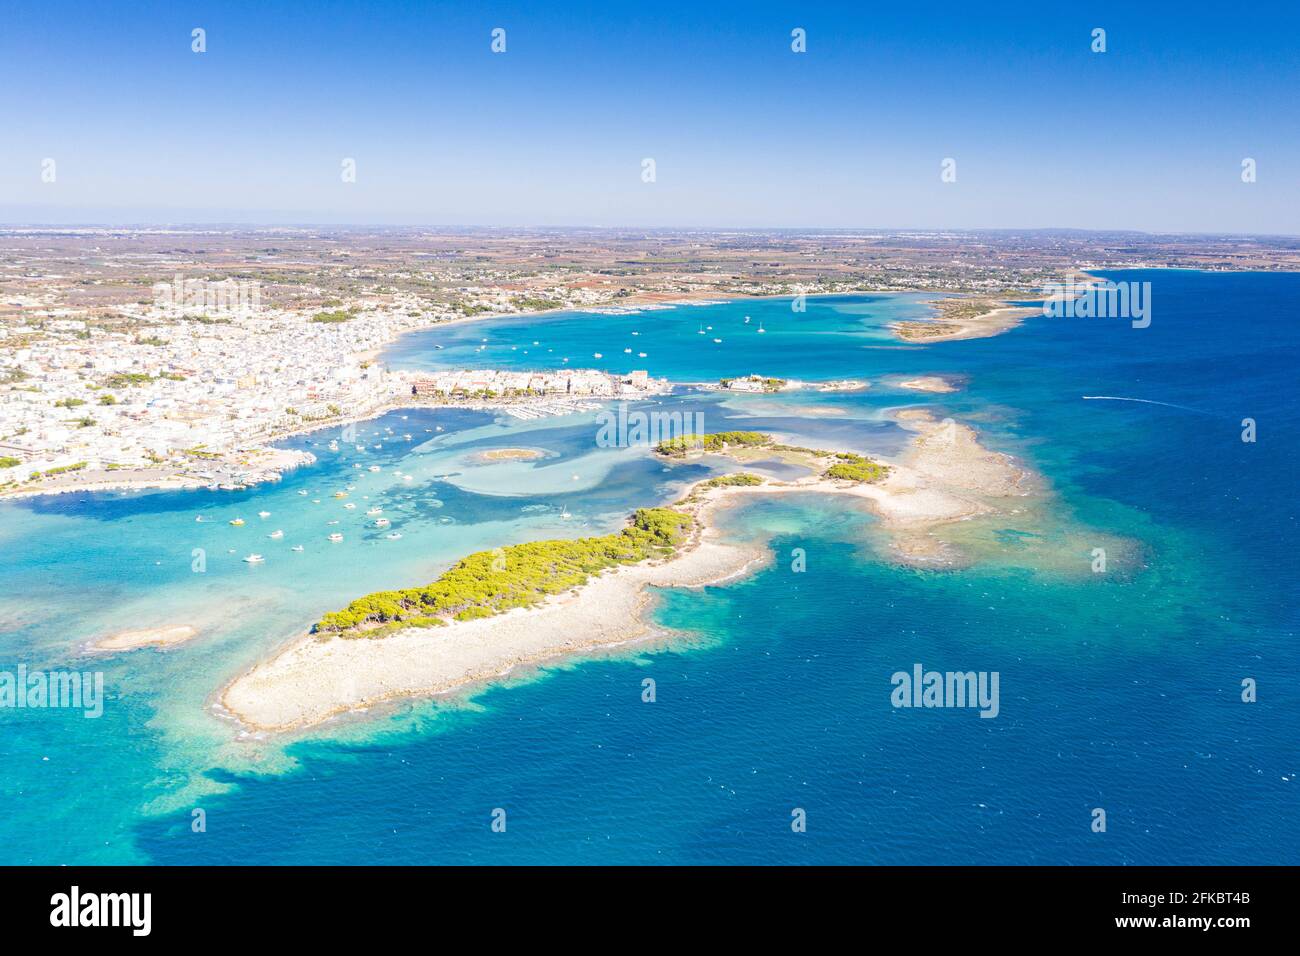 Aerial view of Porto Cesareo coastal town washed by the clear sea, Lecce province, Salento, Apulia, Italy, Europe Stock Photo